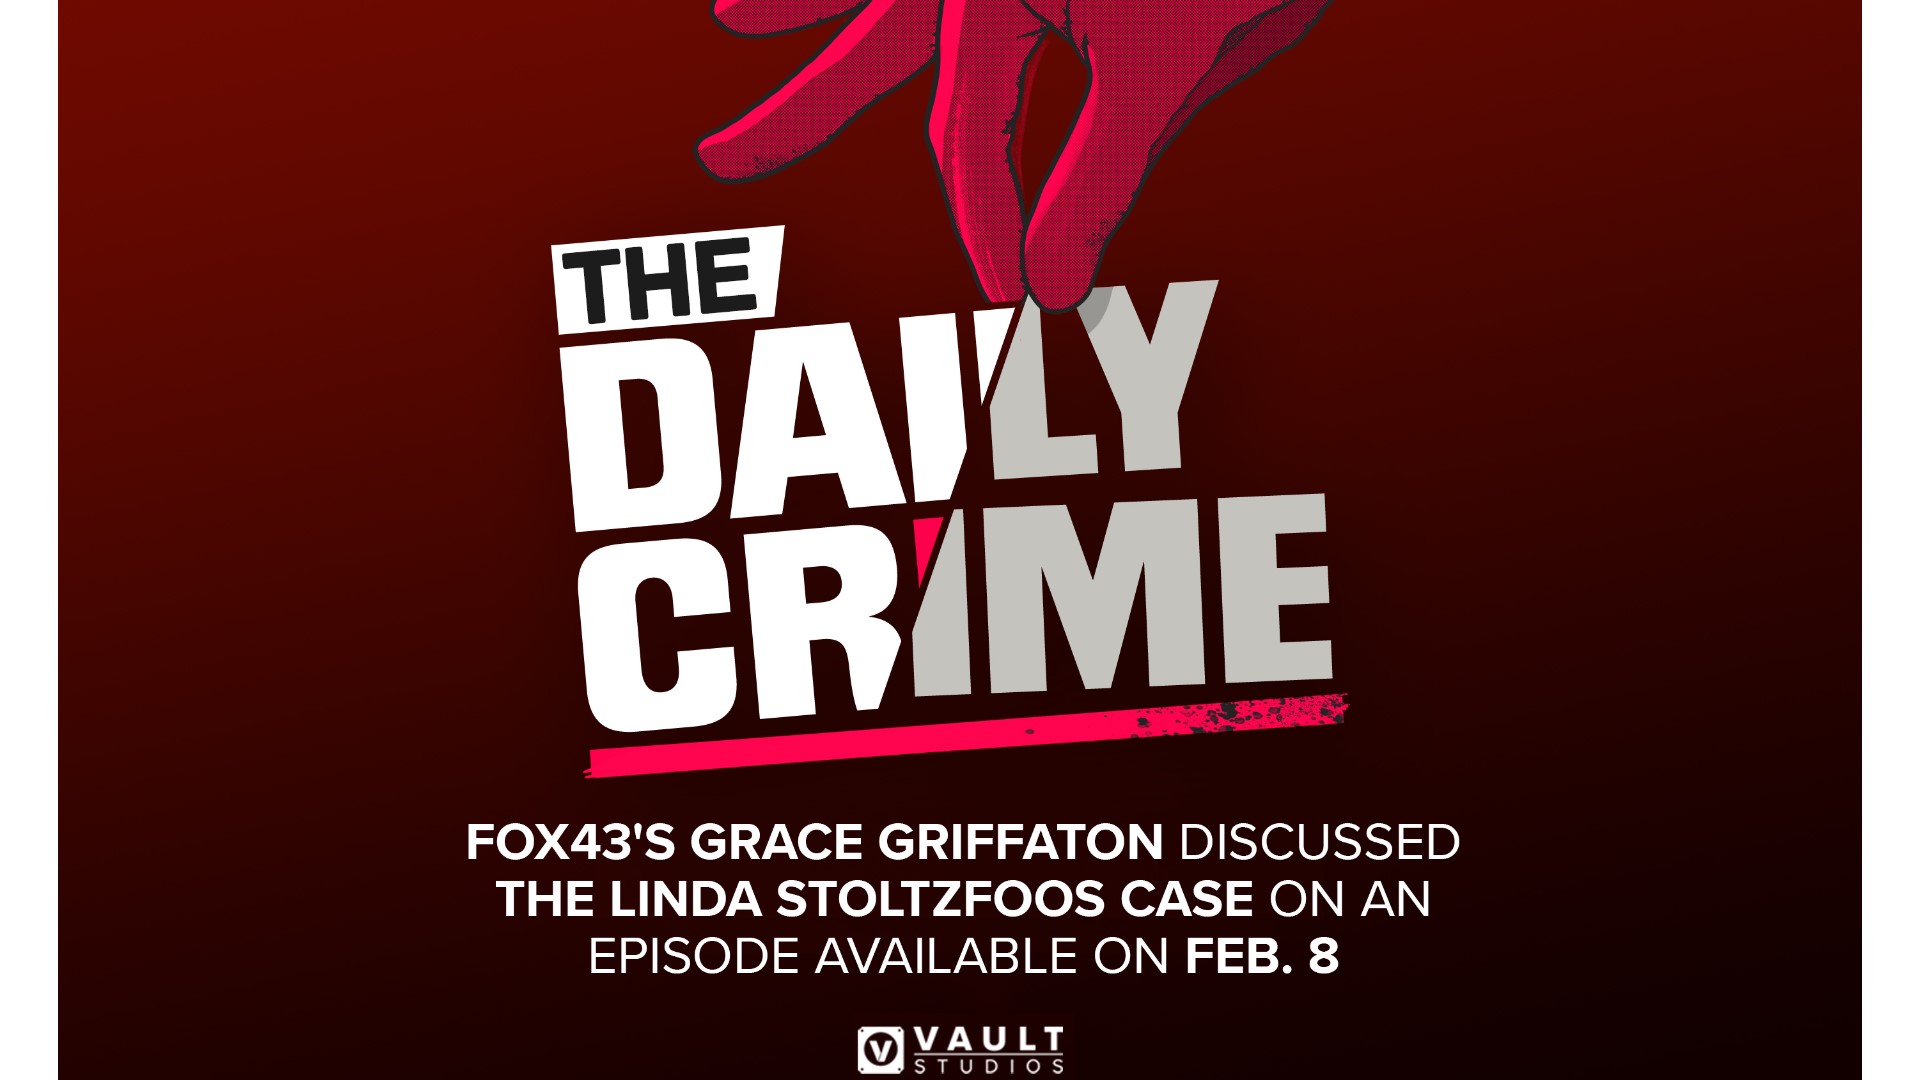 The episode of the podcast focuses on the Linda Stoltzfoos case, and features an interview from FOX43's Grace Griffaton, who has covered the story extensively.